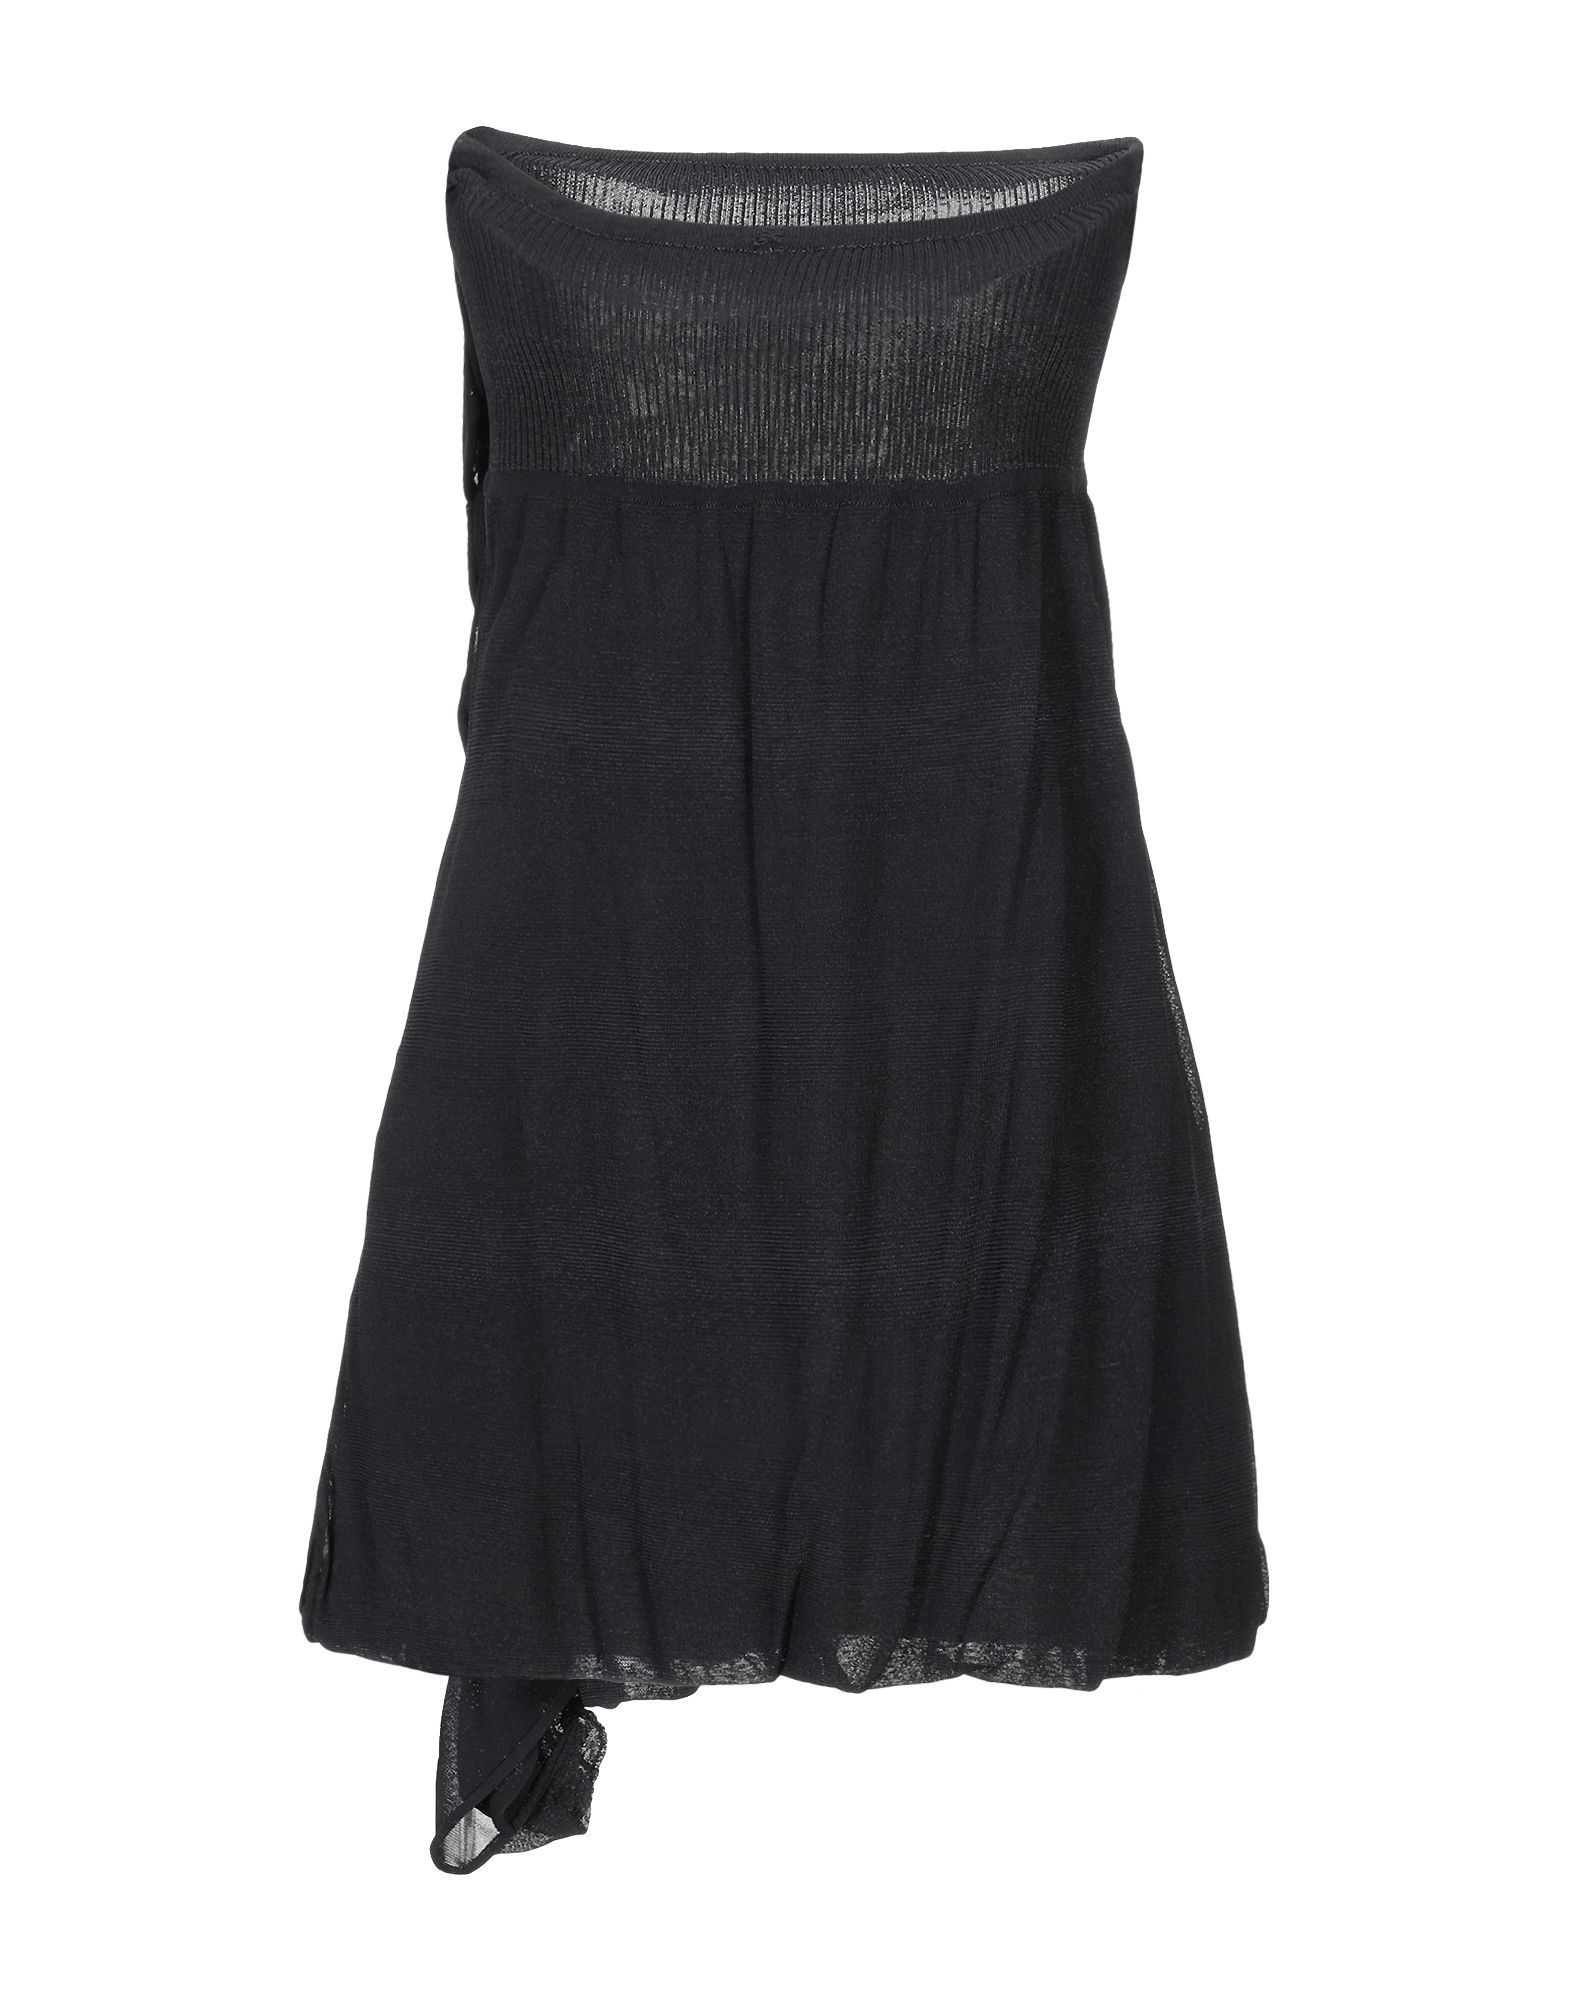 knitted, ruffles, basic solid colour, deep neckline, sleeveless, no pockets, fully lined, dress